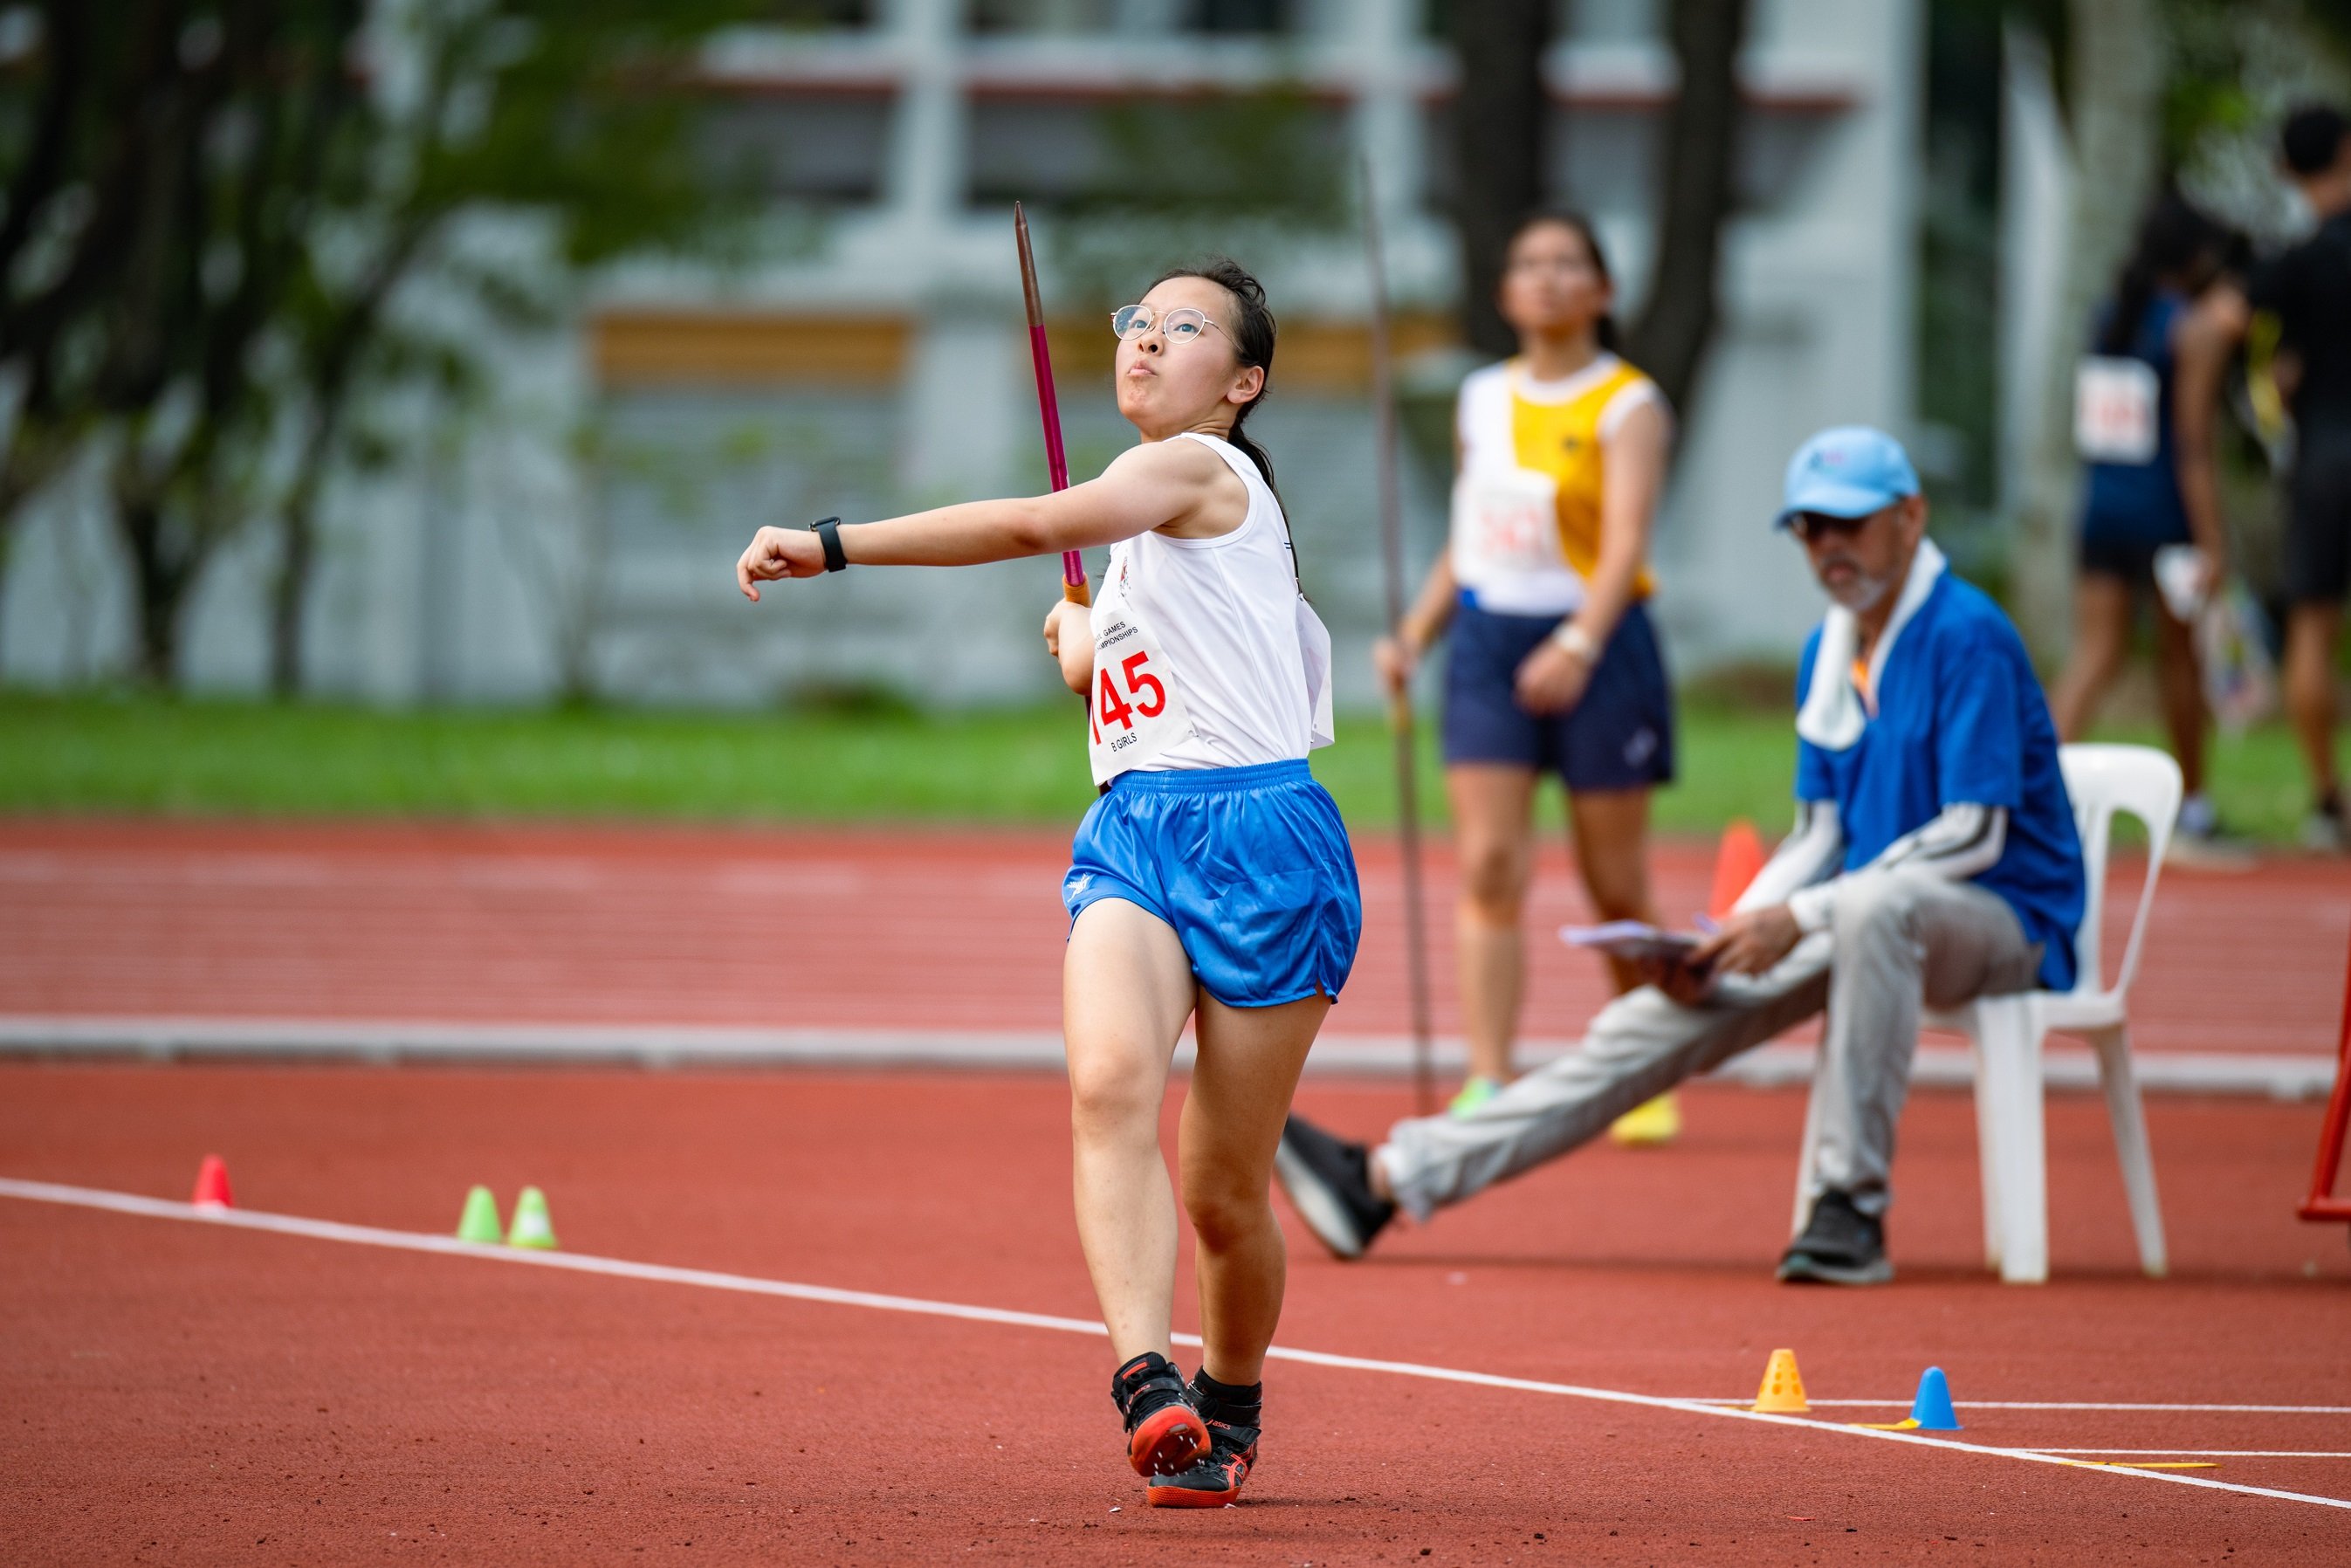 2023-04-14_National School Game T&F 2023 (PM)_Photo by Tom Ng Kok Leong_DSC_7224B Girls Javelin Chan Sok Mun (tag 145) of SNG 1st place 32.89m